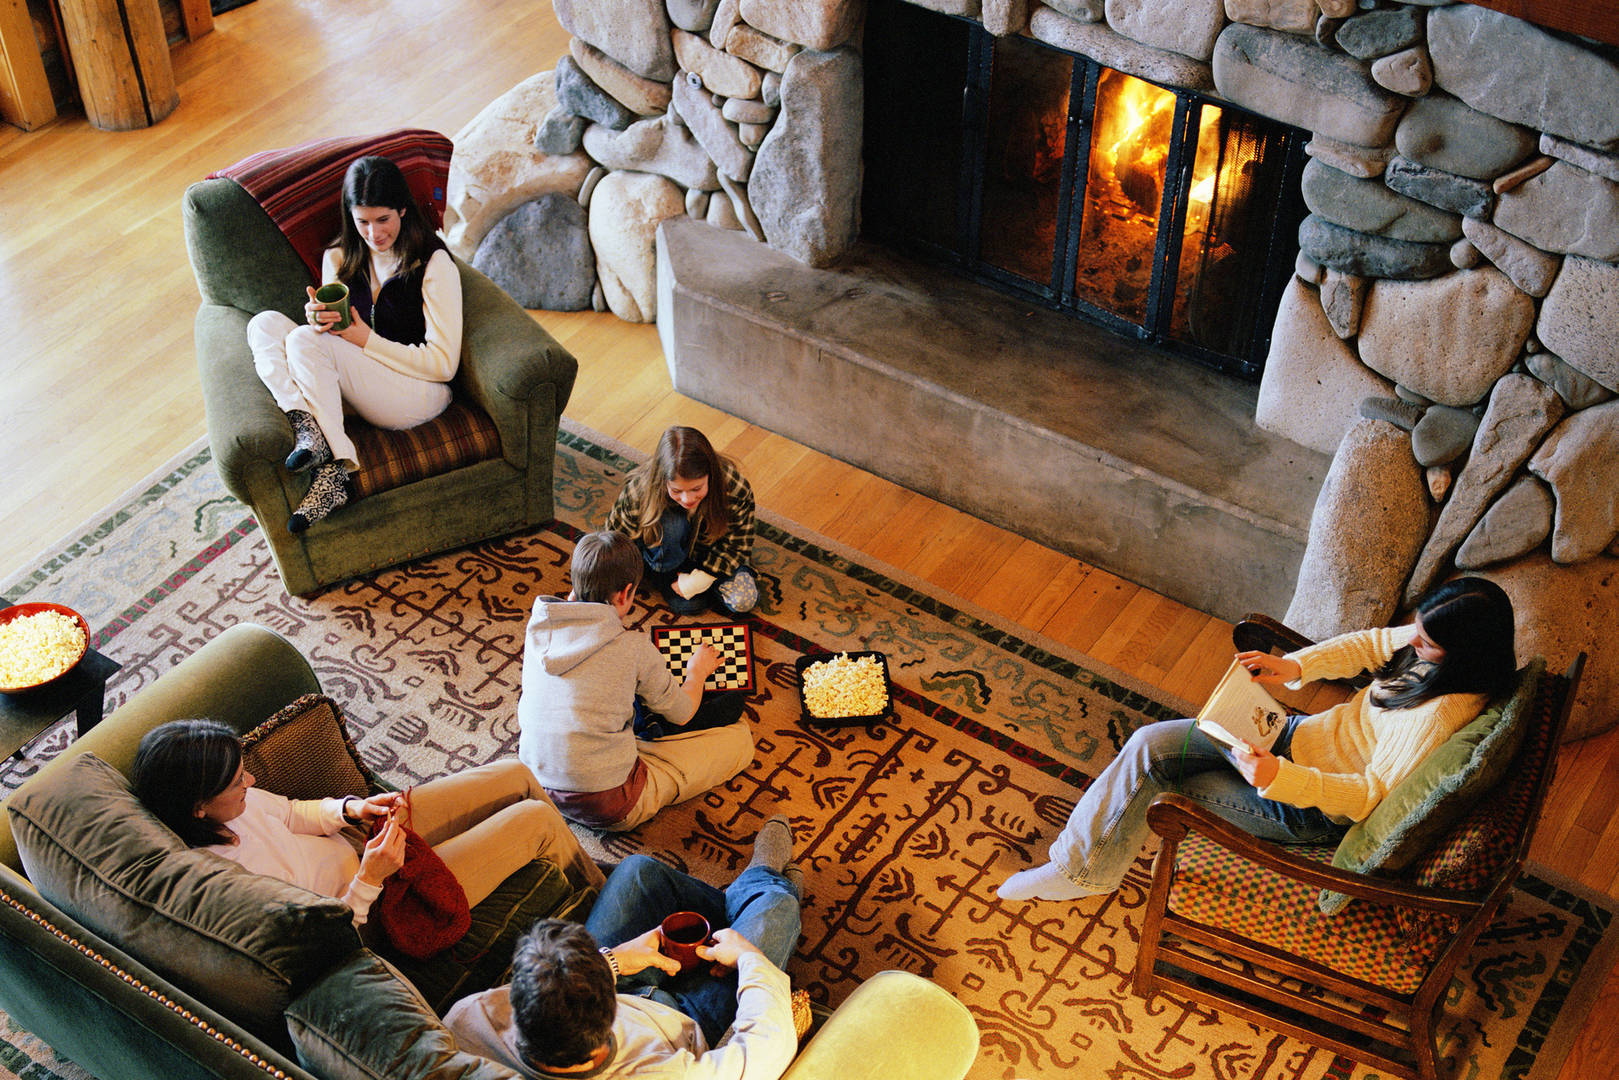 Fireplace Safety for Families